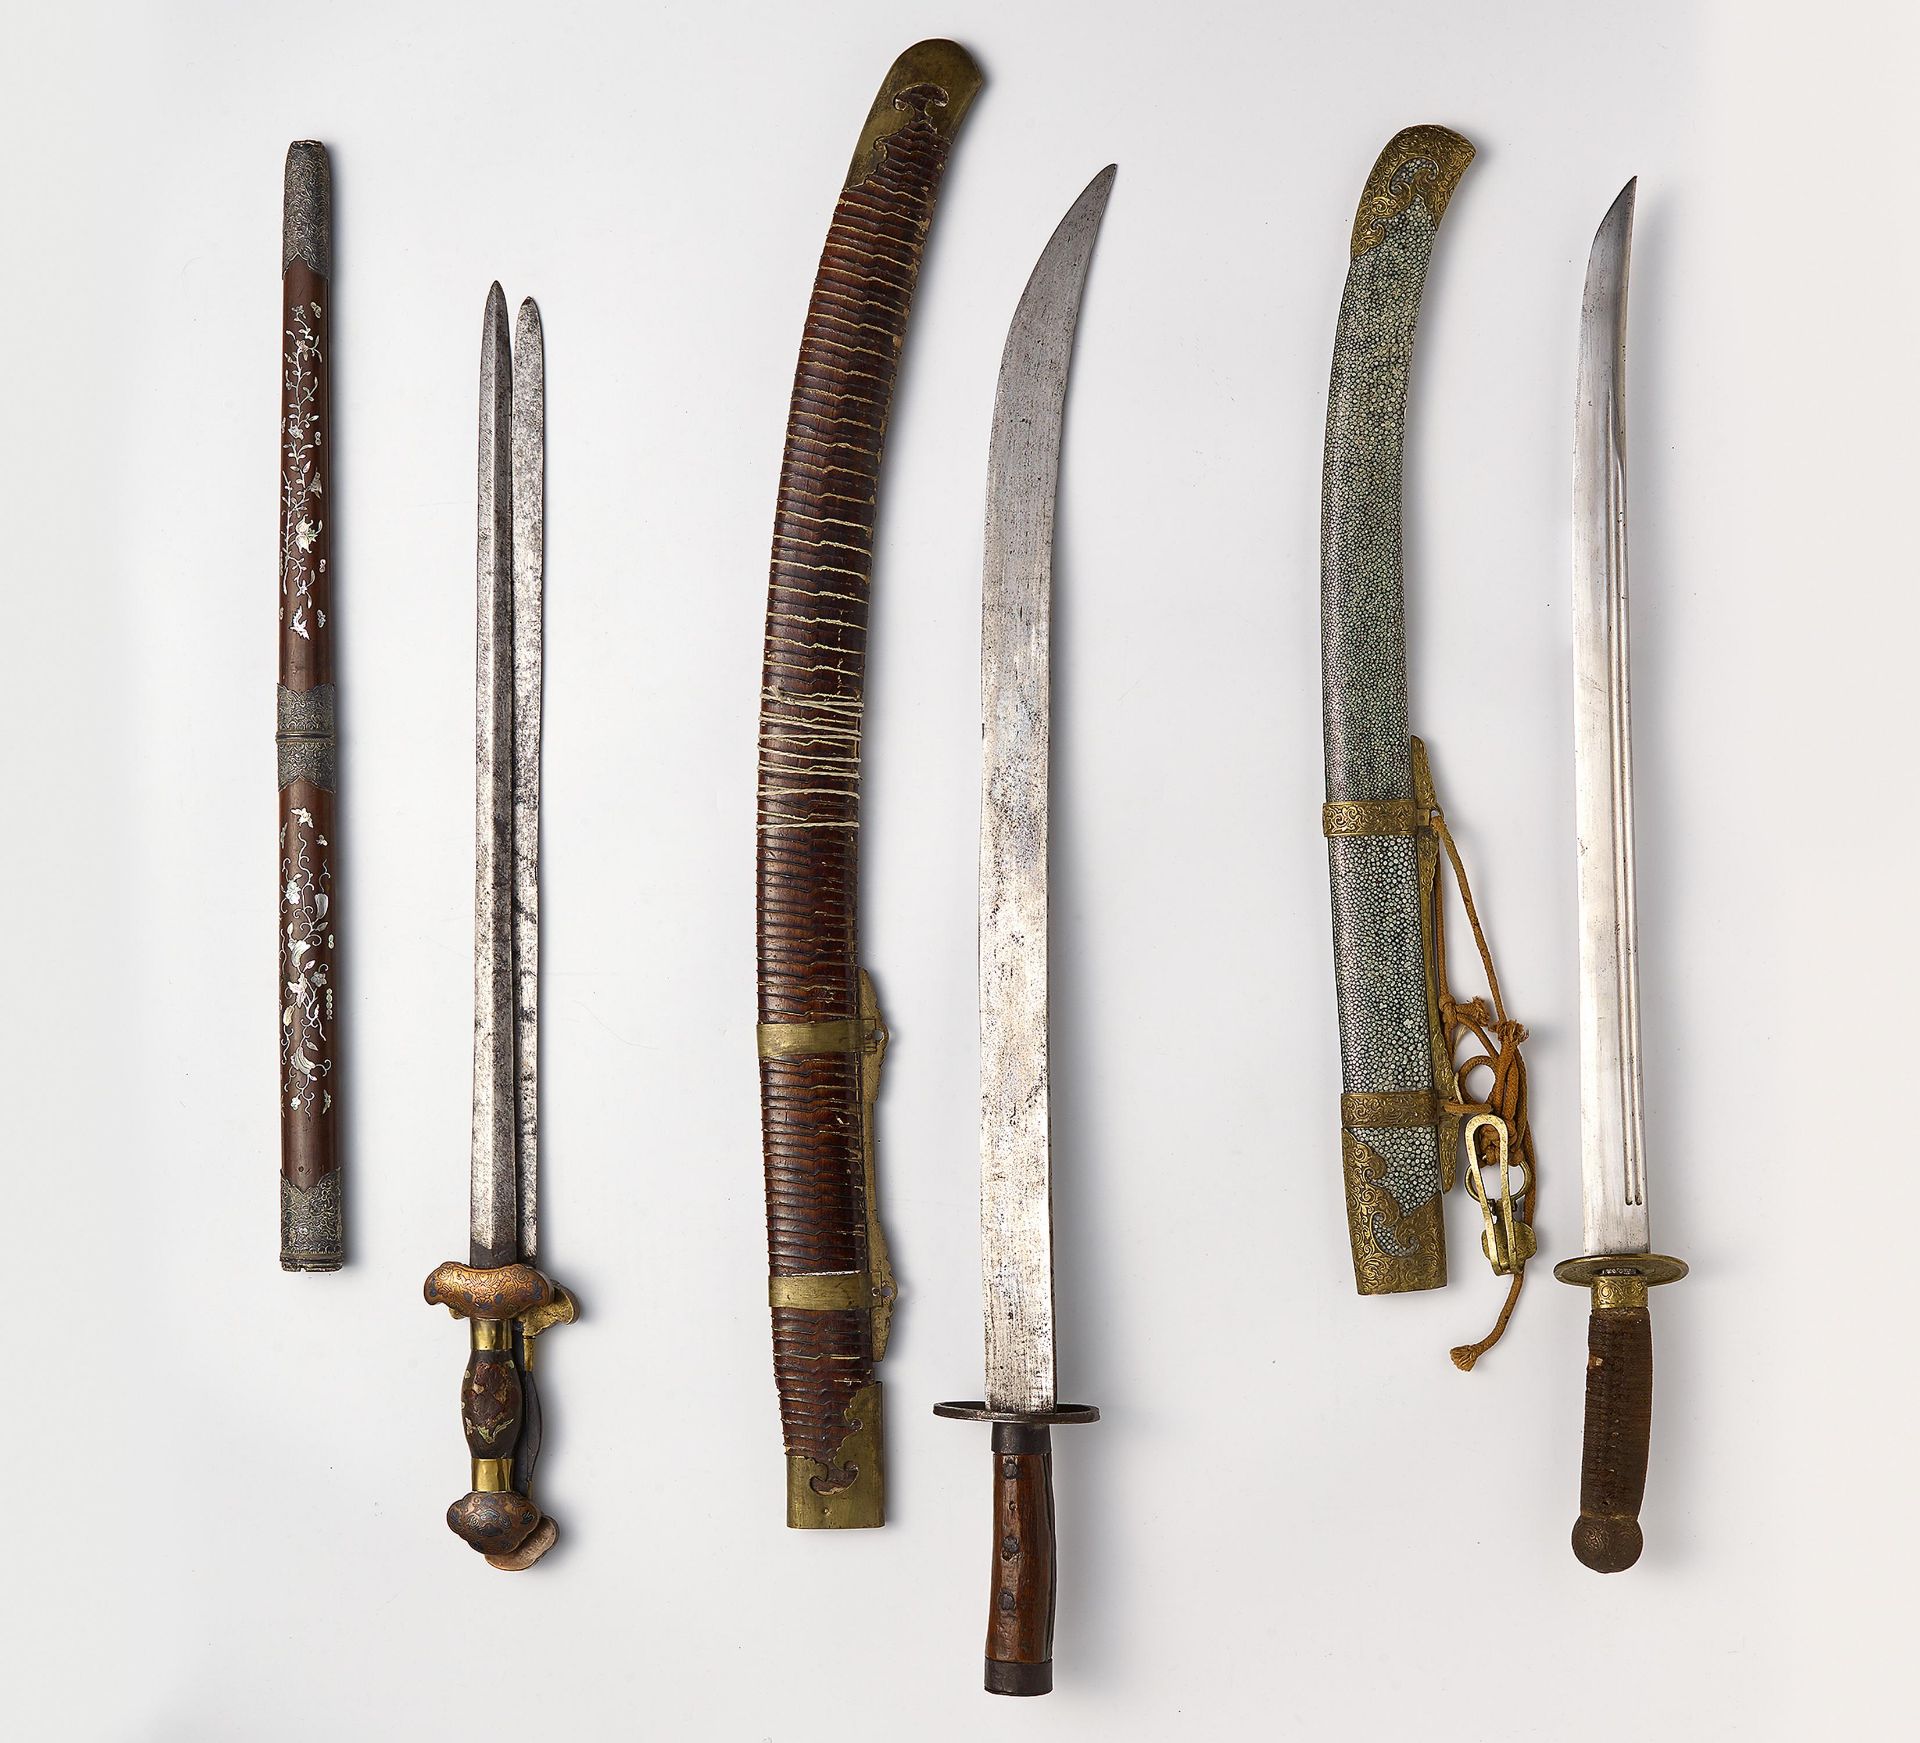 ONE STRAIGHT DOUBLE AND TWO CURVED SWORDS WITH SHEATHS. Origin: China. Dynasty: Qing dynasty.